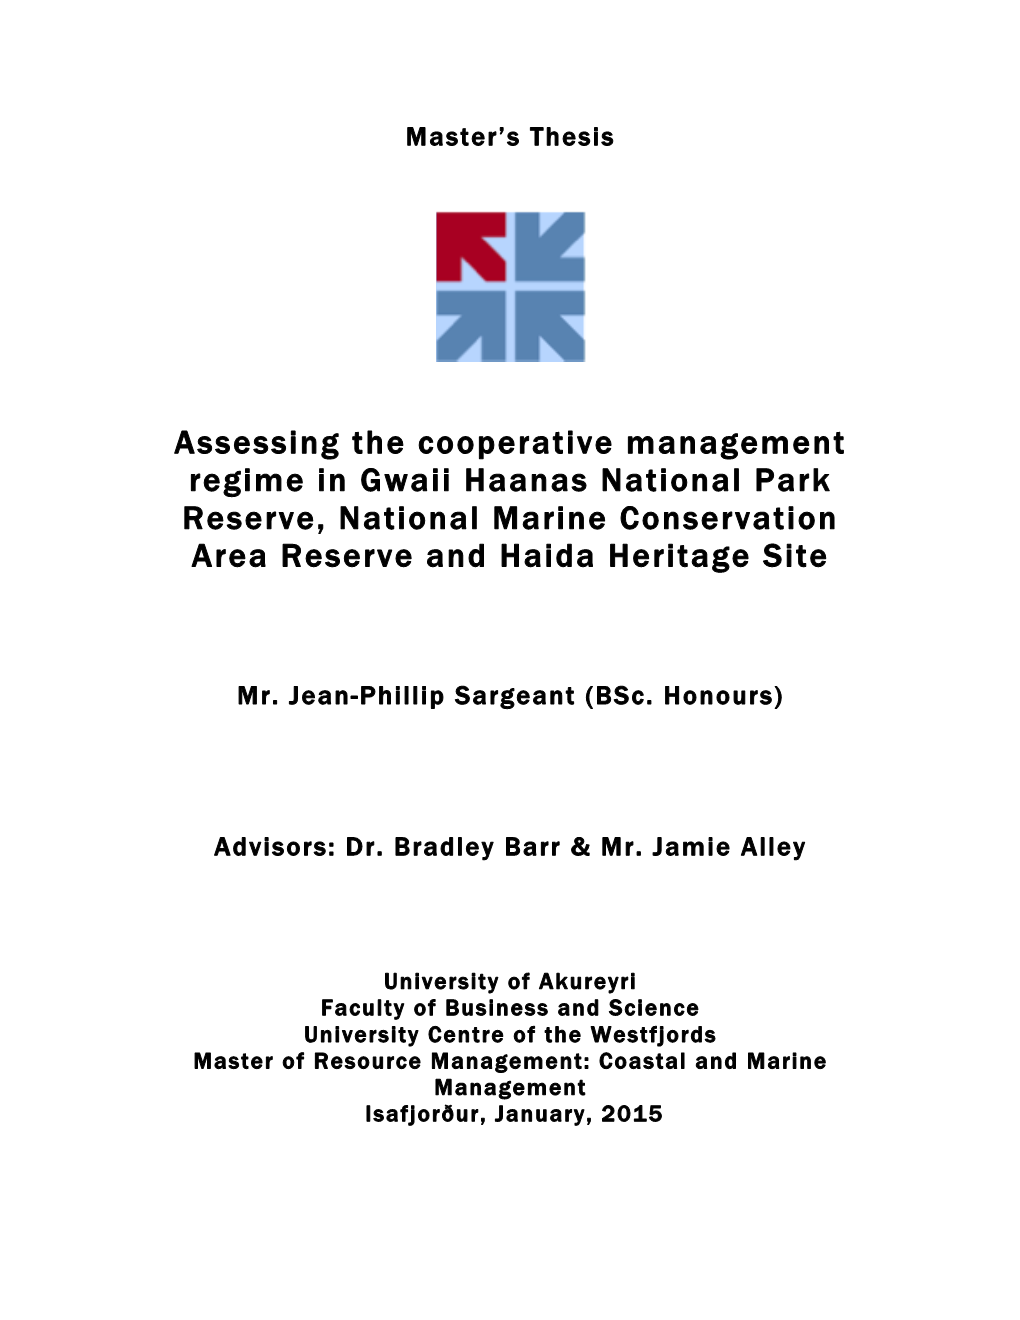 Assessing the Cooperative Management Regime in Gwaii Haanas National Park Reserve, National Marine Conservation Area Reserve and Haida Heritage Site